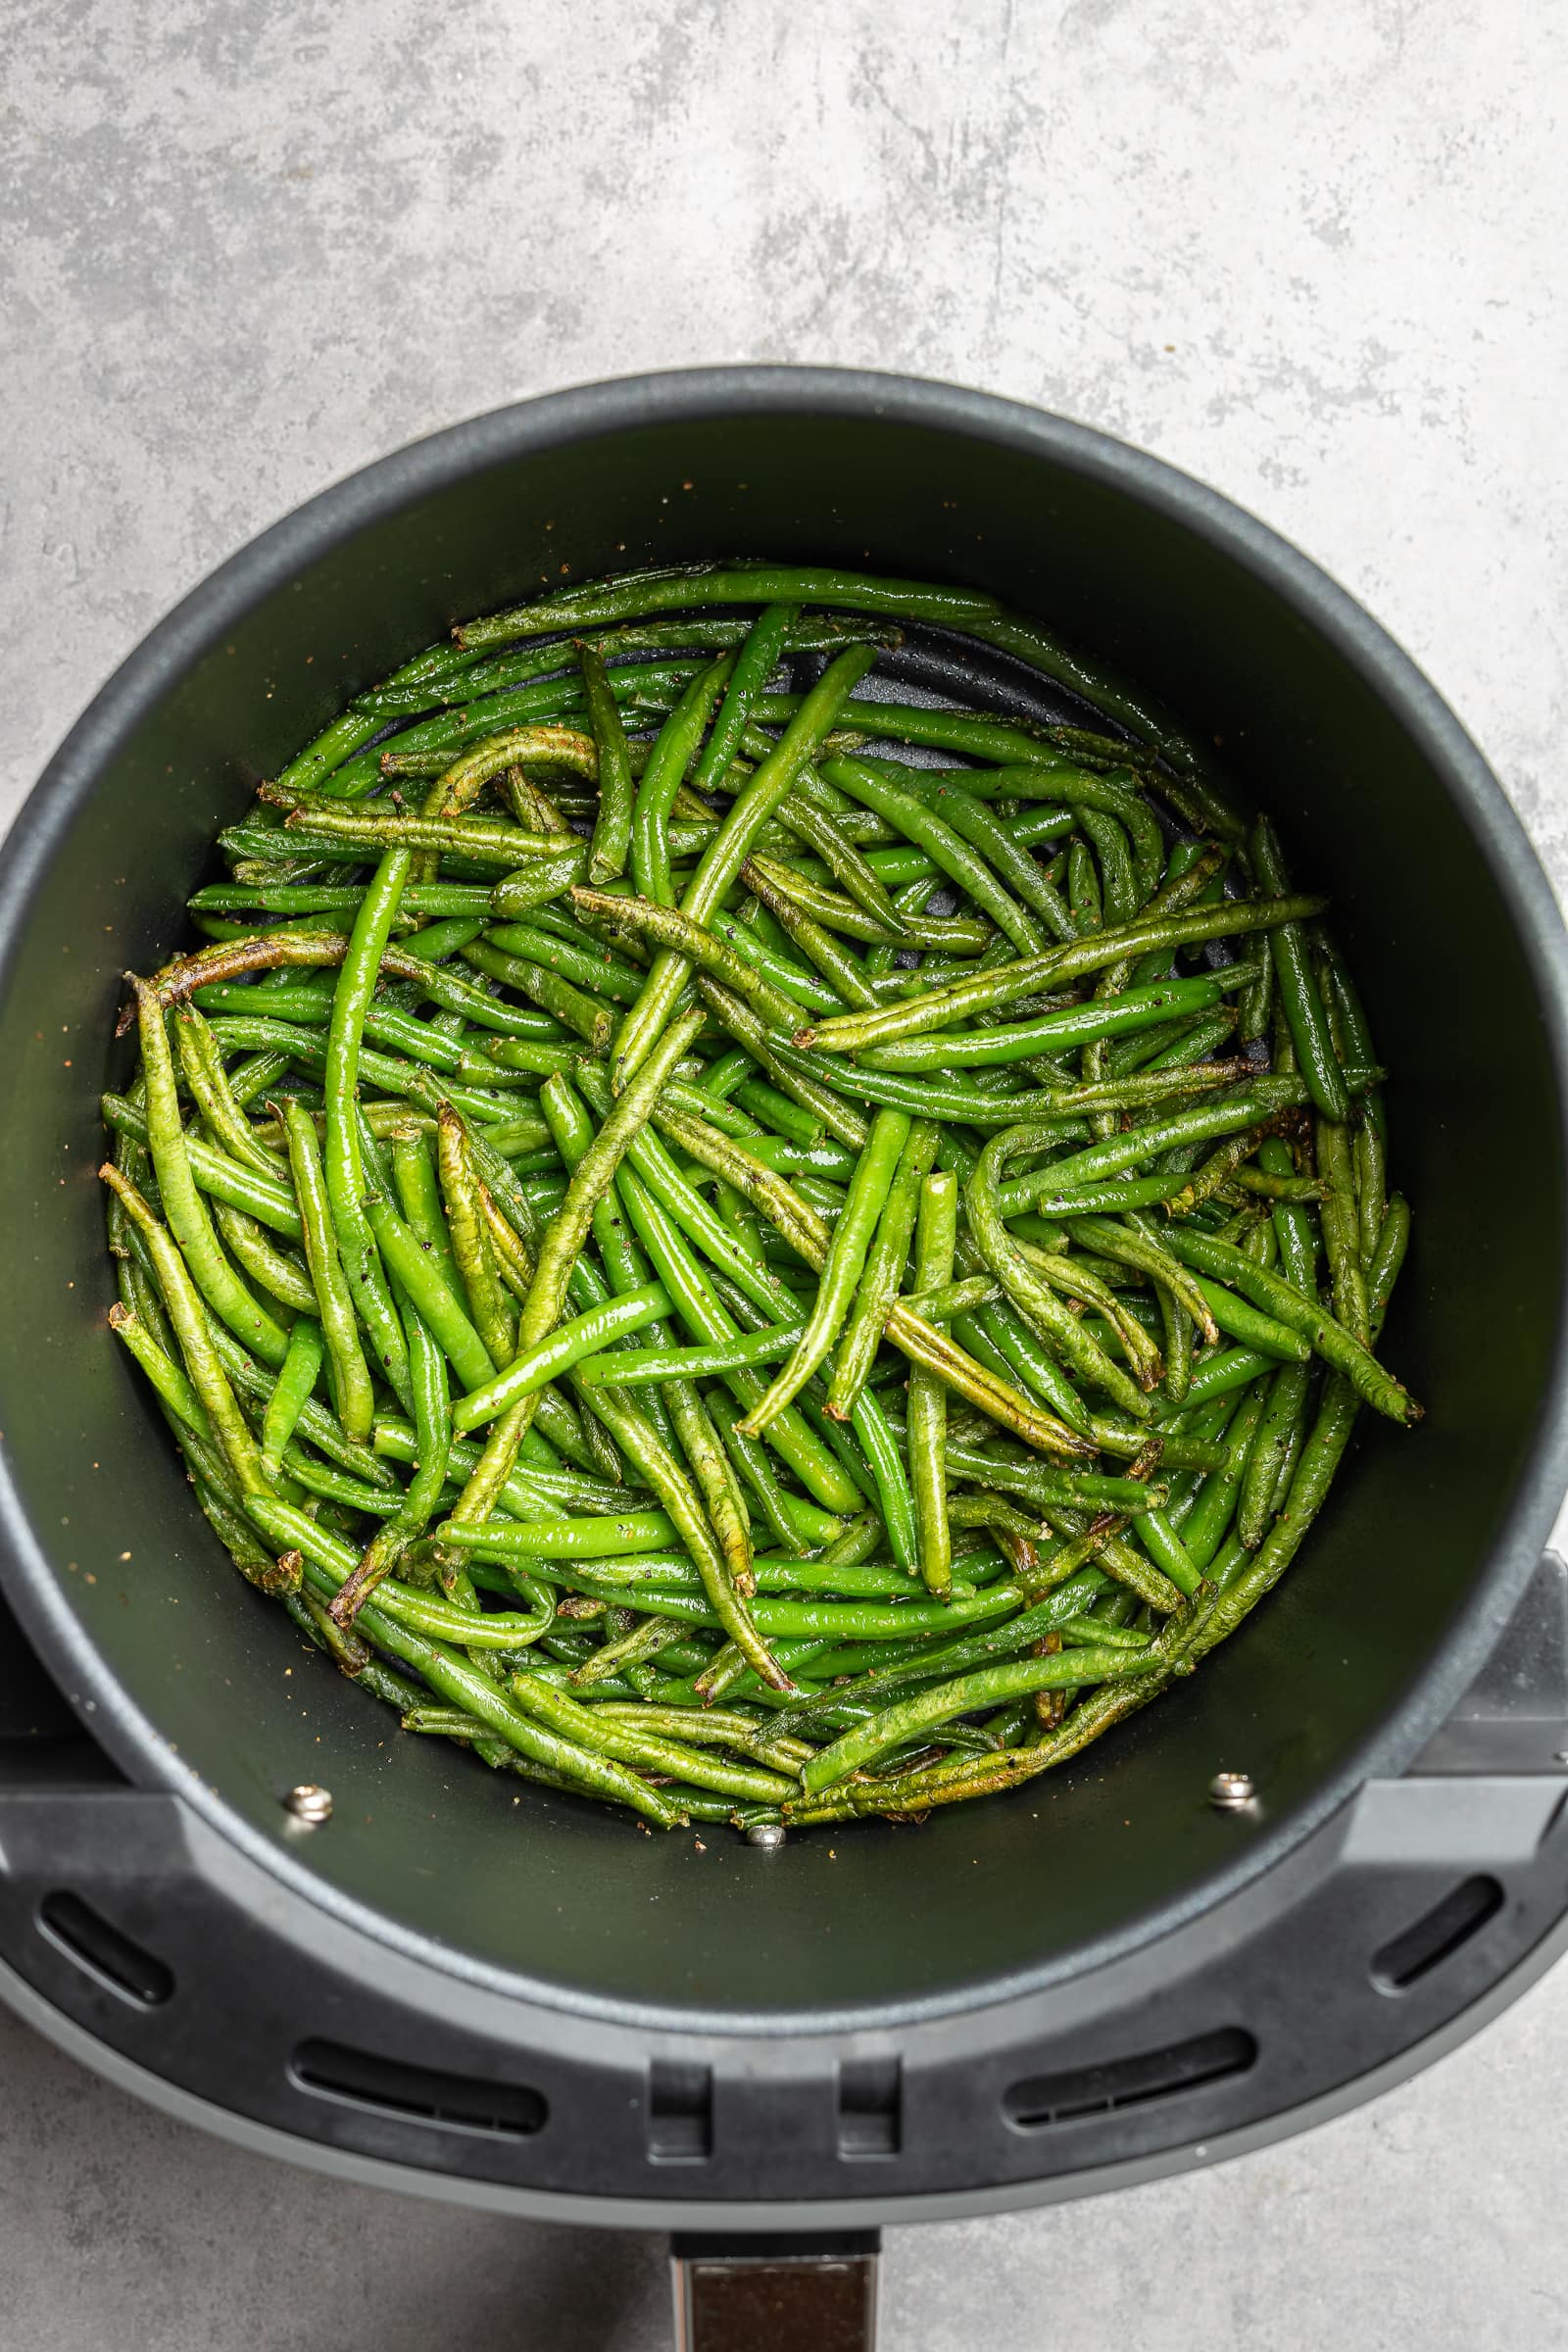 Cooked green beans in an air fryer.